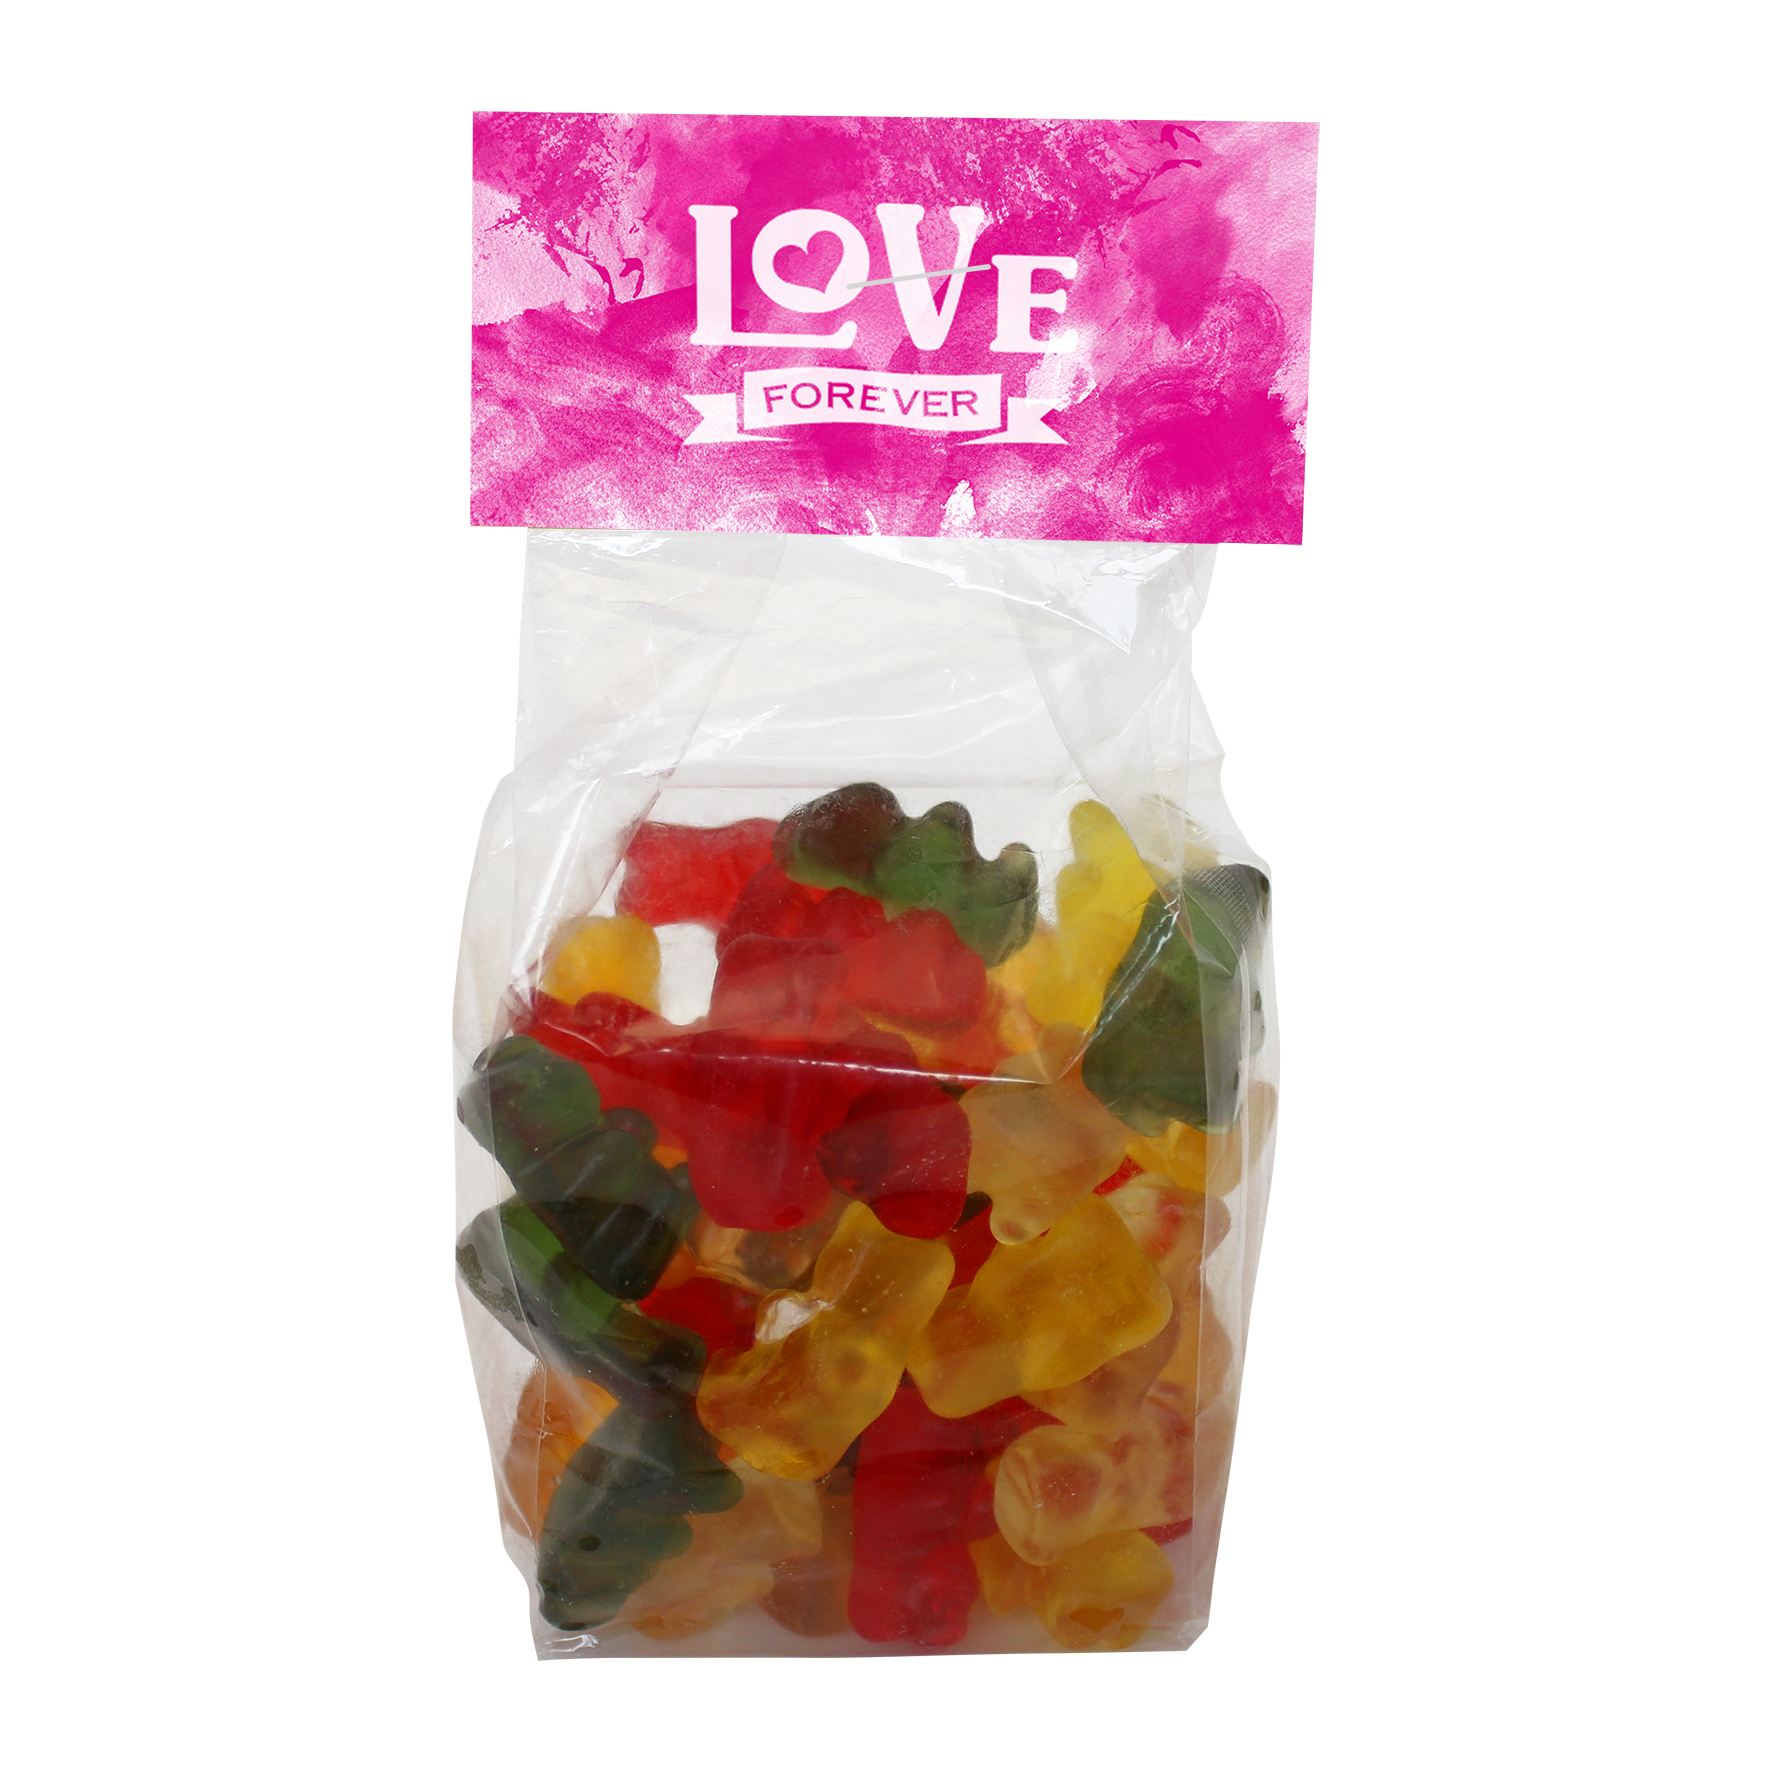 c 0631gb 00 09 - 150gr Bag with a card base and printed header board filled with jelly beans